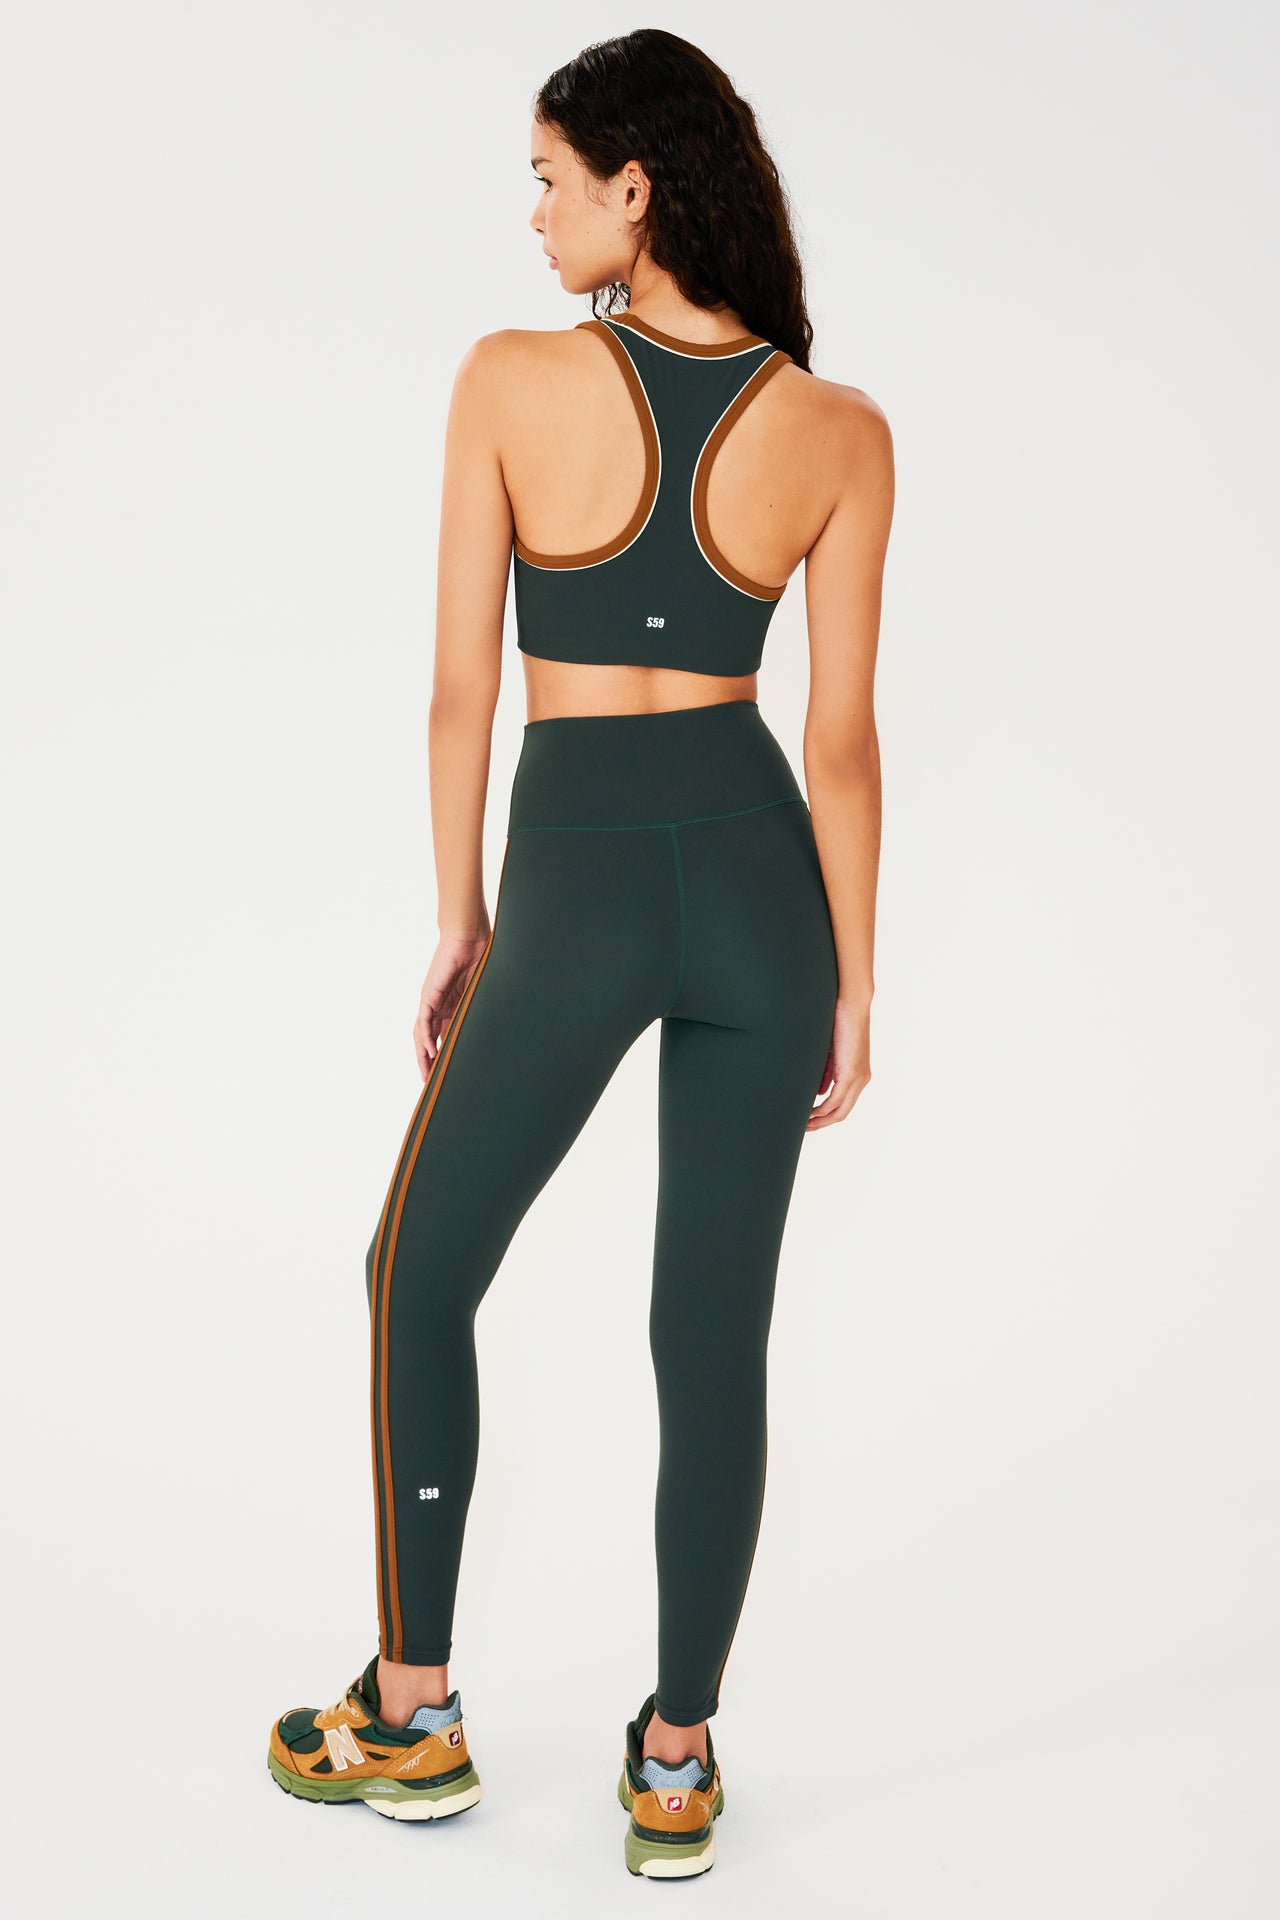 Full back view of girl wearing dark green leggings with two thin brown stripes down the side and a dark green sports bra with multi colored shoes